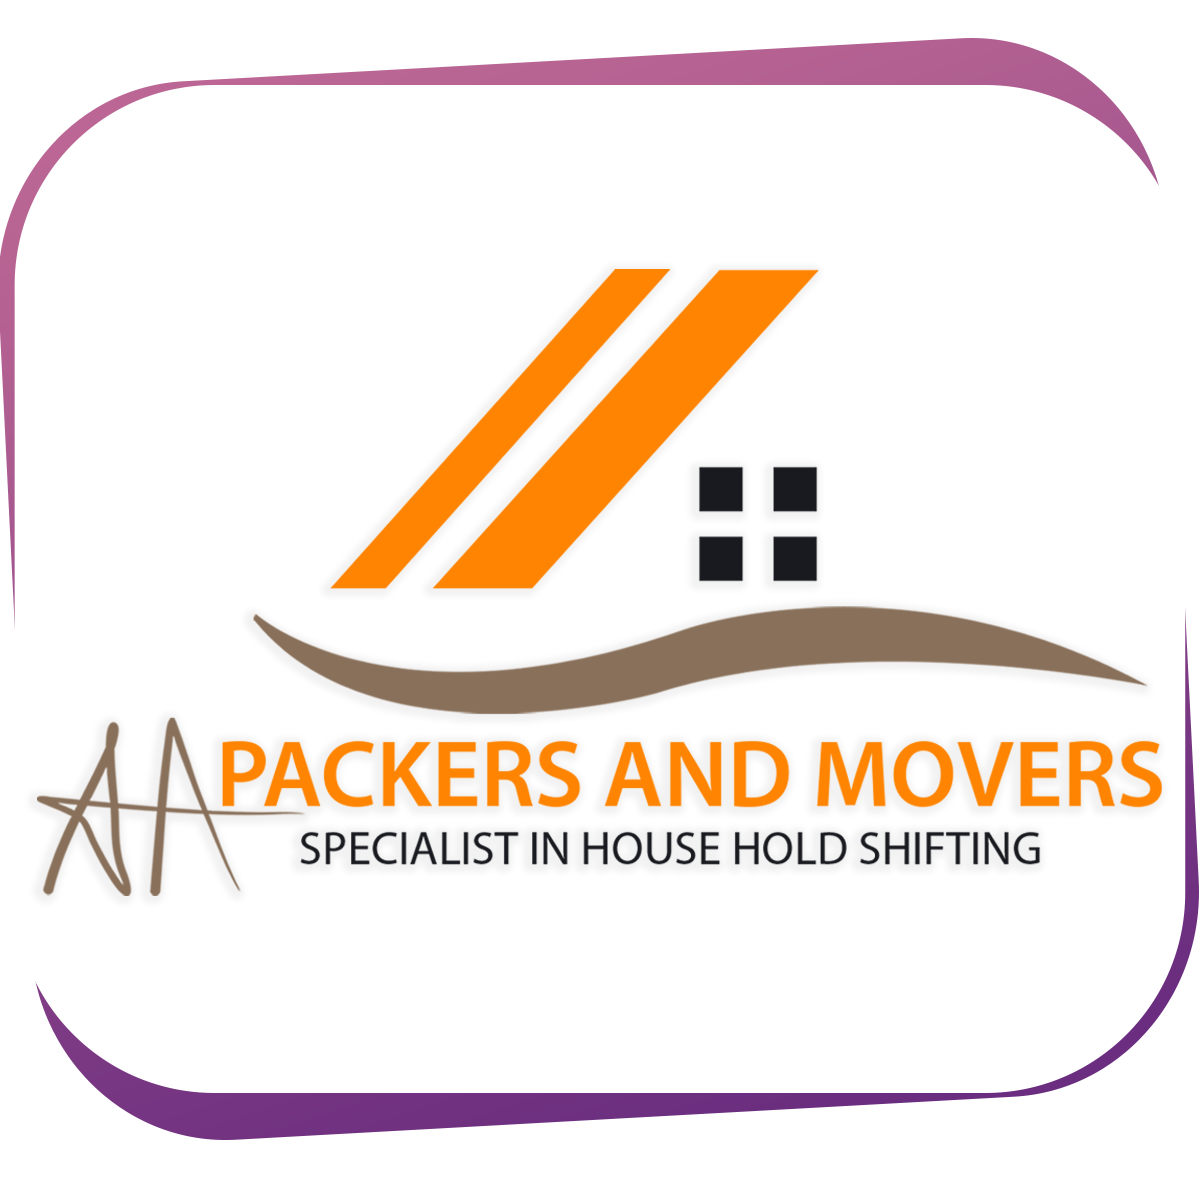 AA Packers And Movers